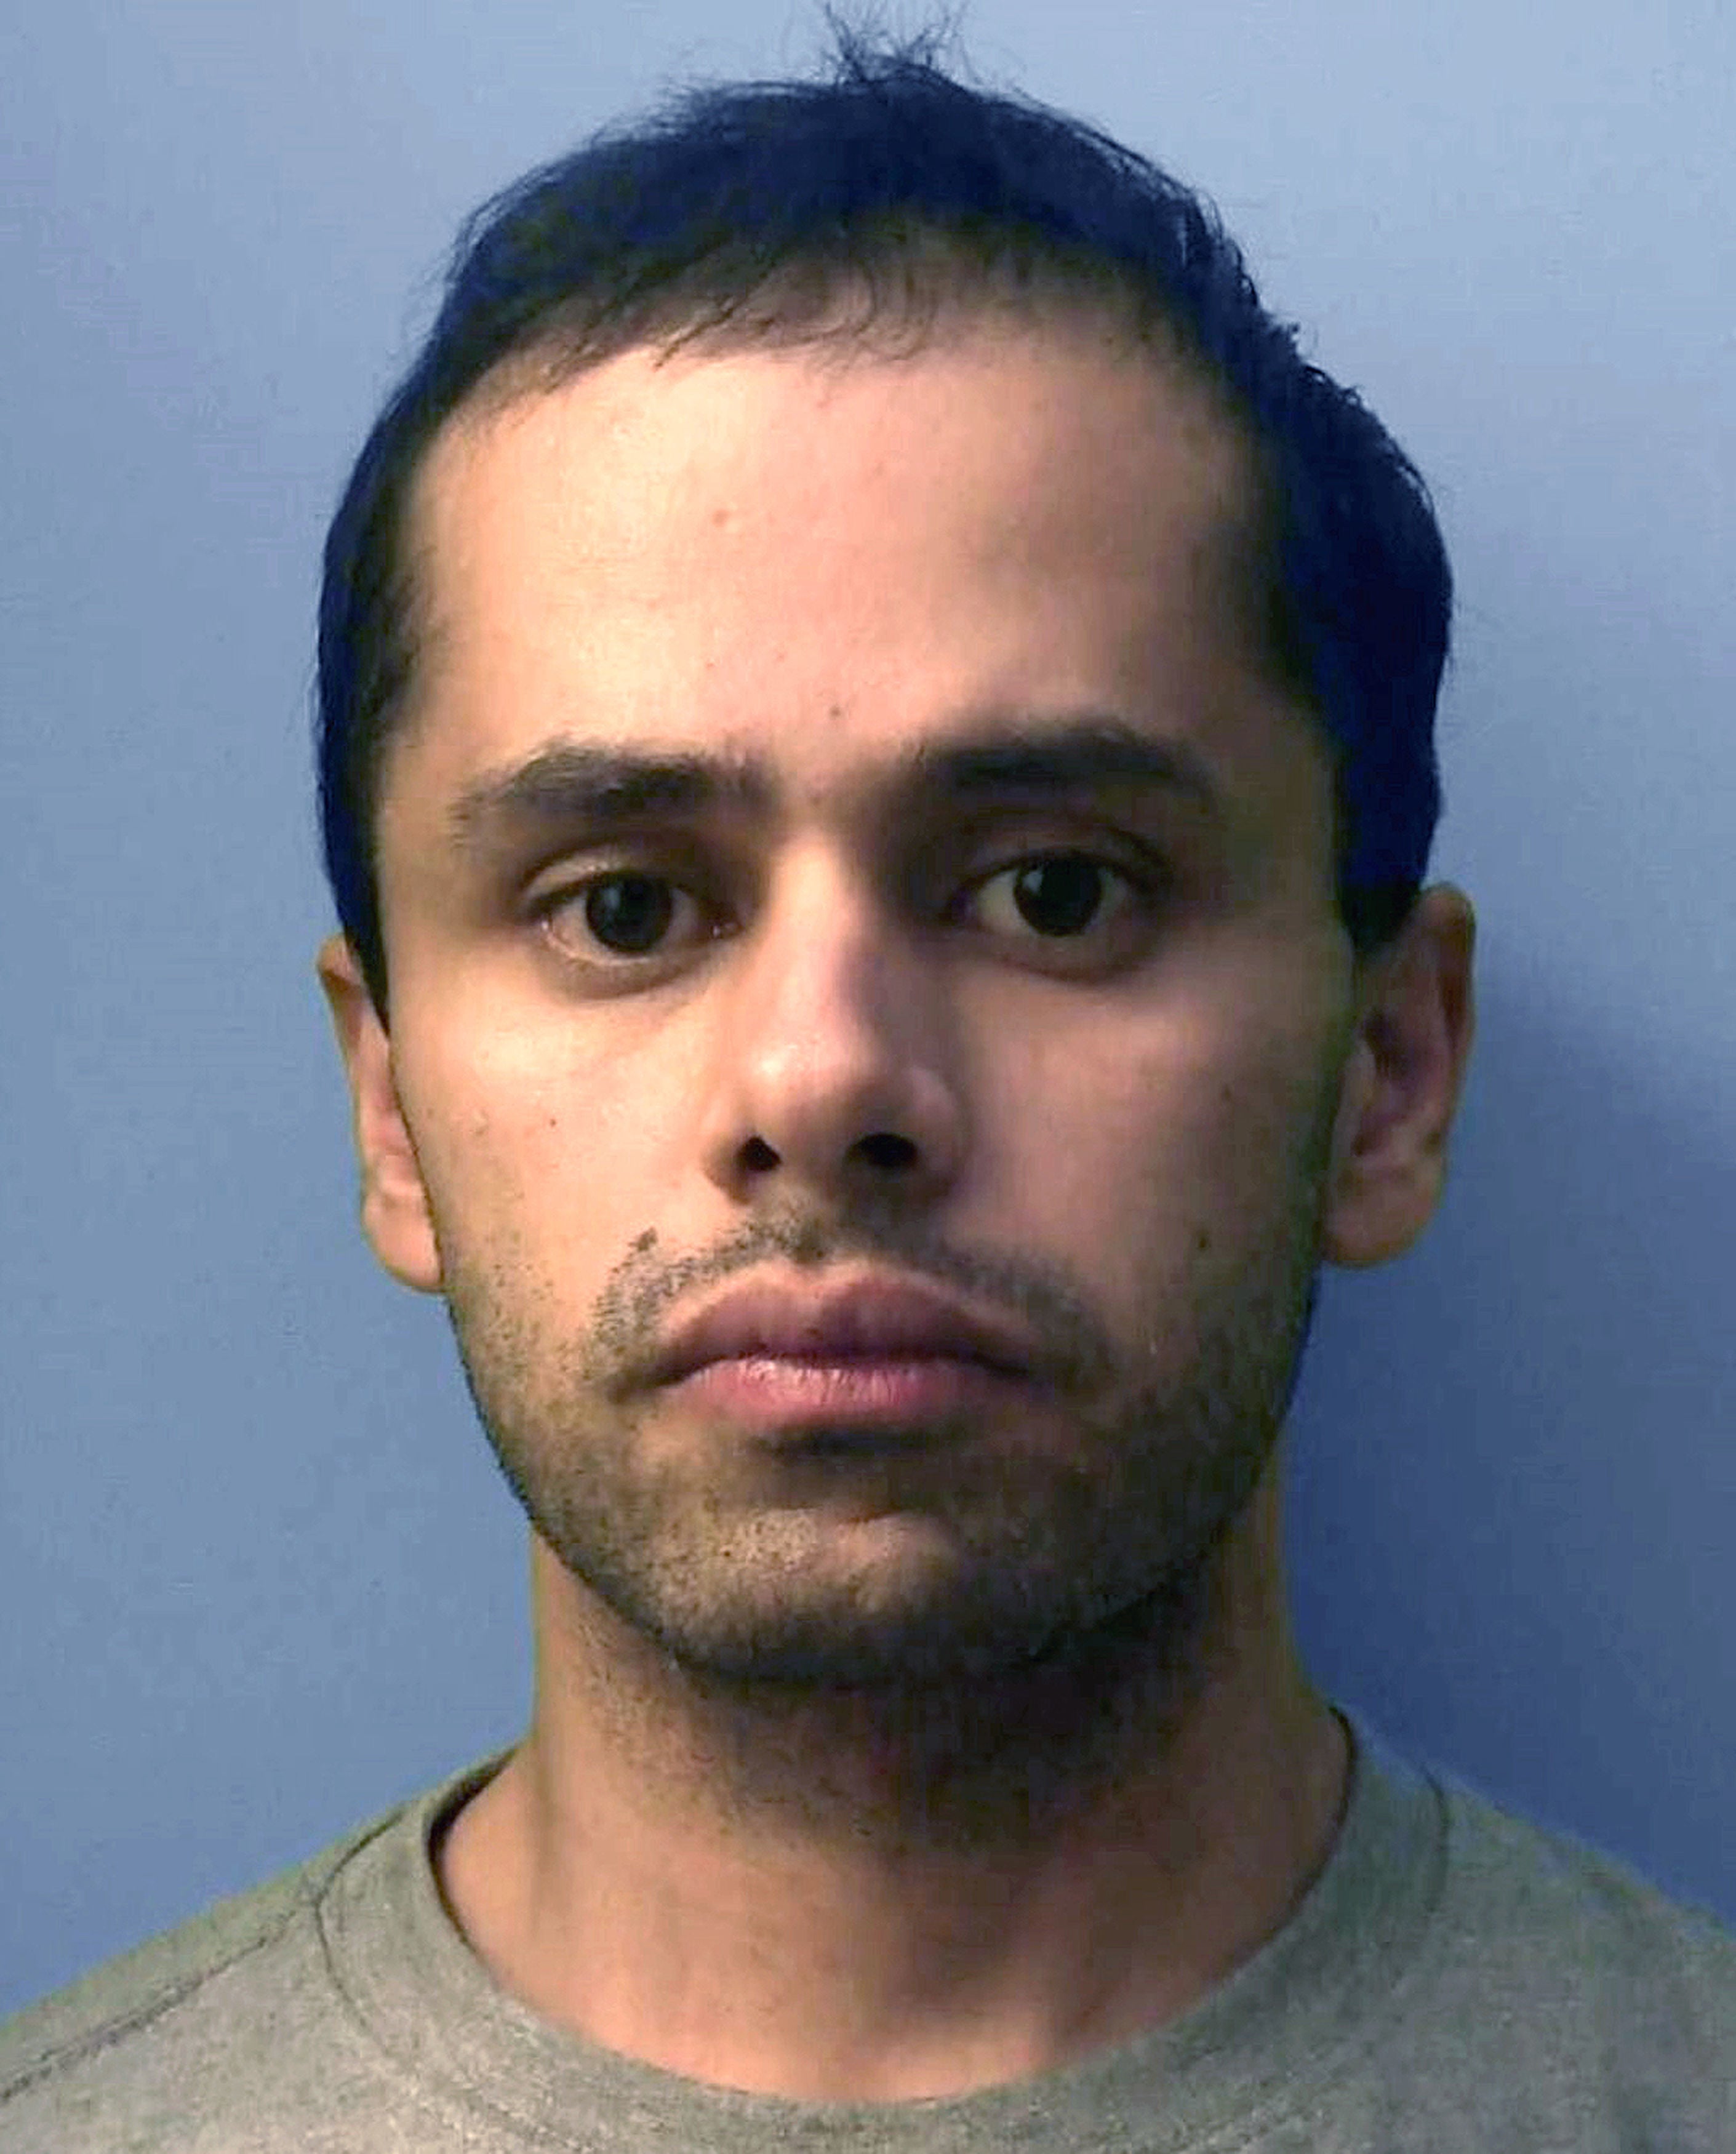 Milad Rouf, 25, from Cardiff is sentenced to 11 years imprisonment for attacking his ex-girlfriend with acid.